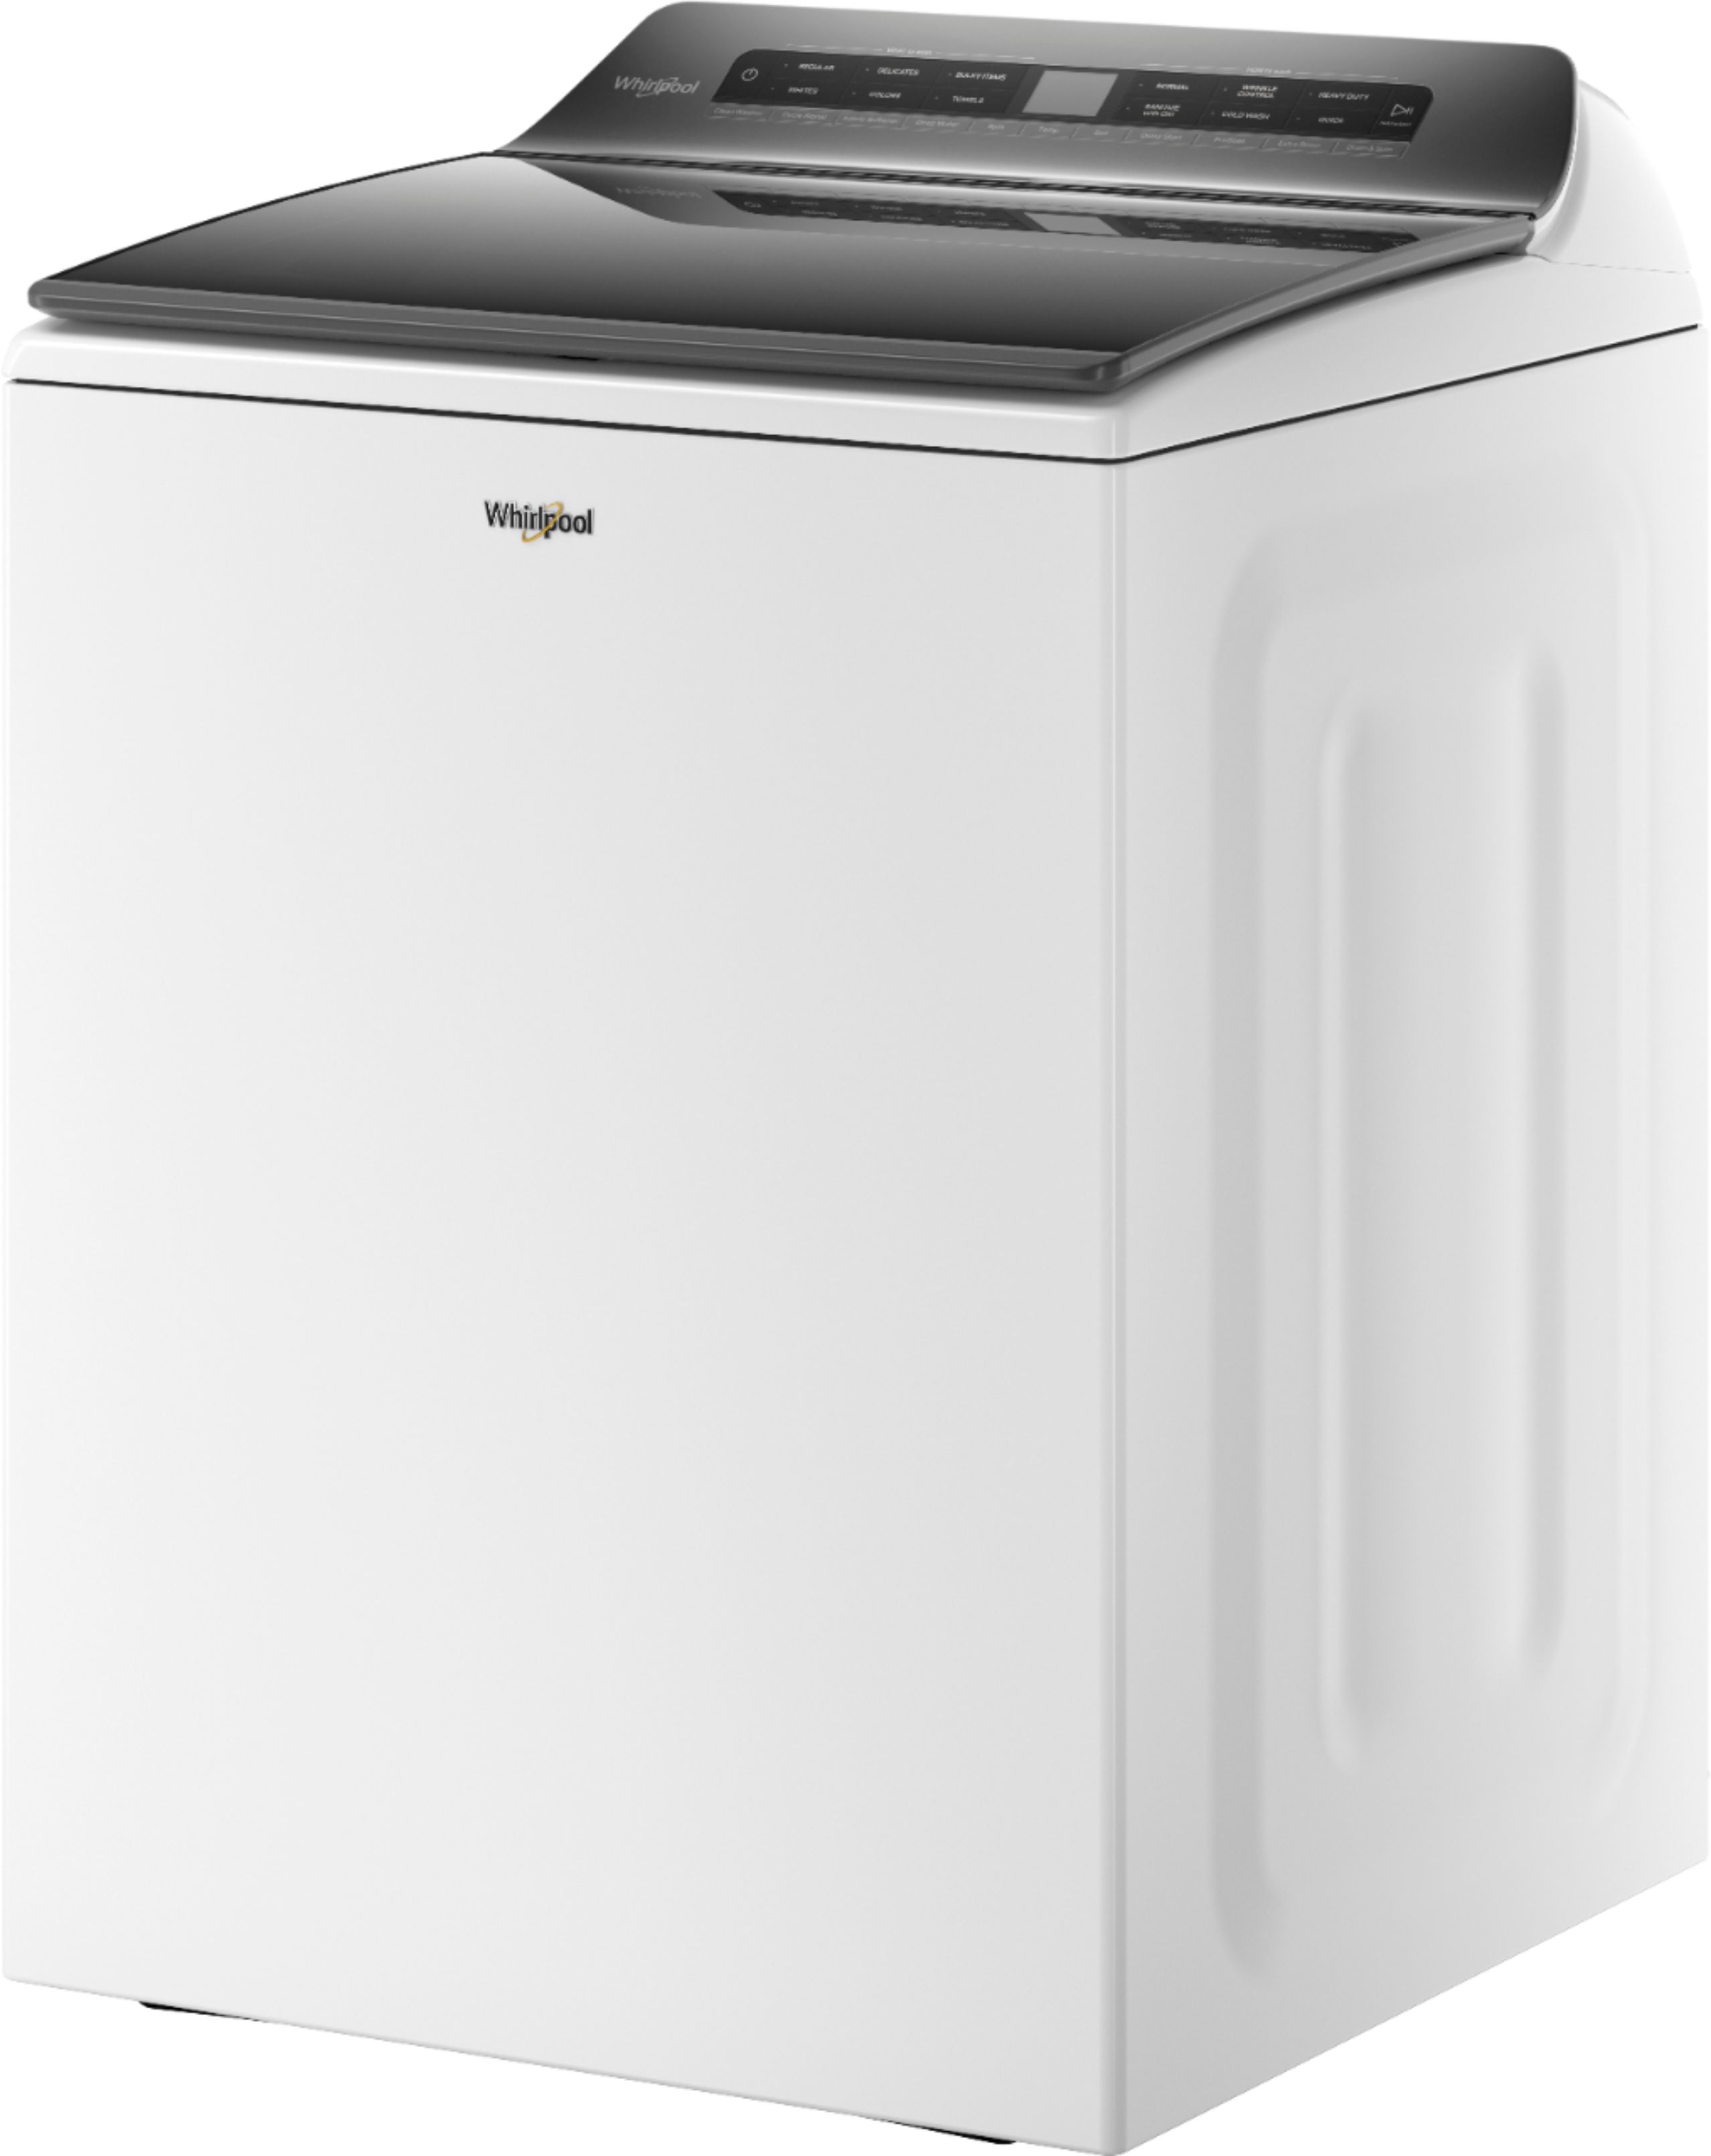 Left View: Whirlpool - 4.7 Cu. Ft. Top Load Washer with Pretreat Station - White